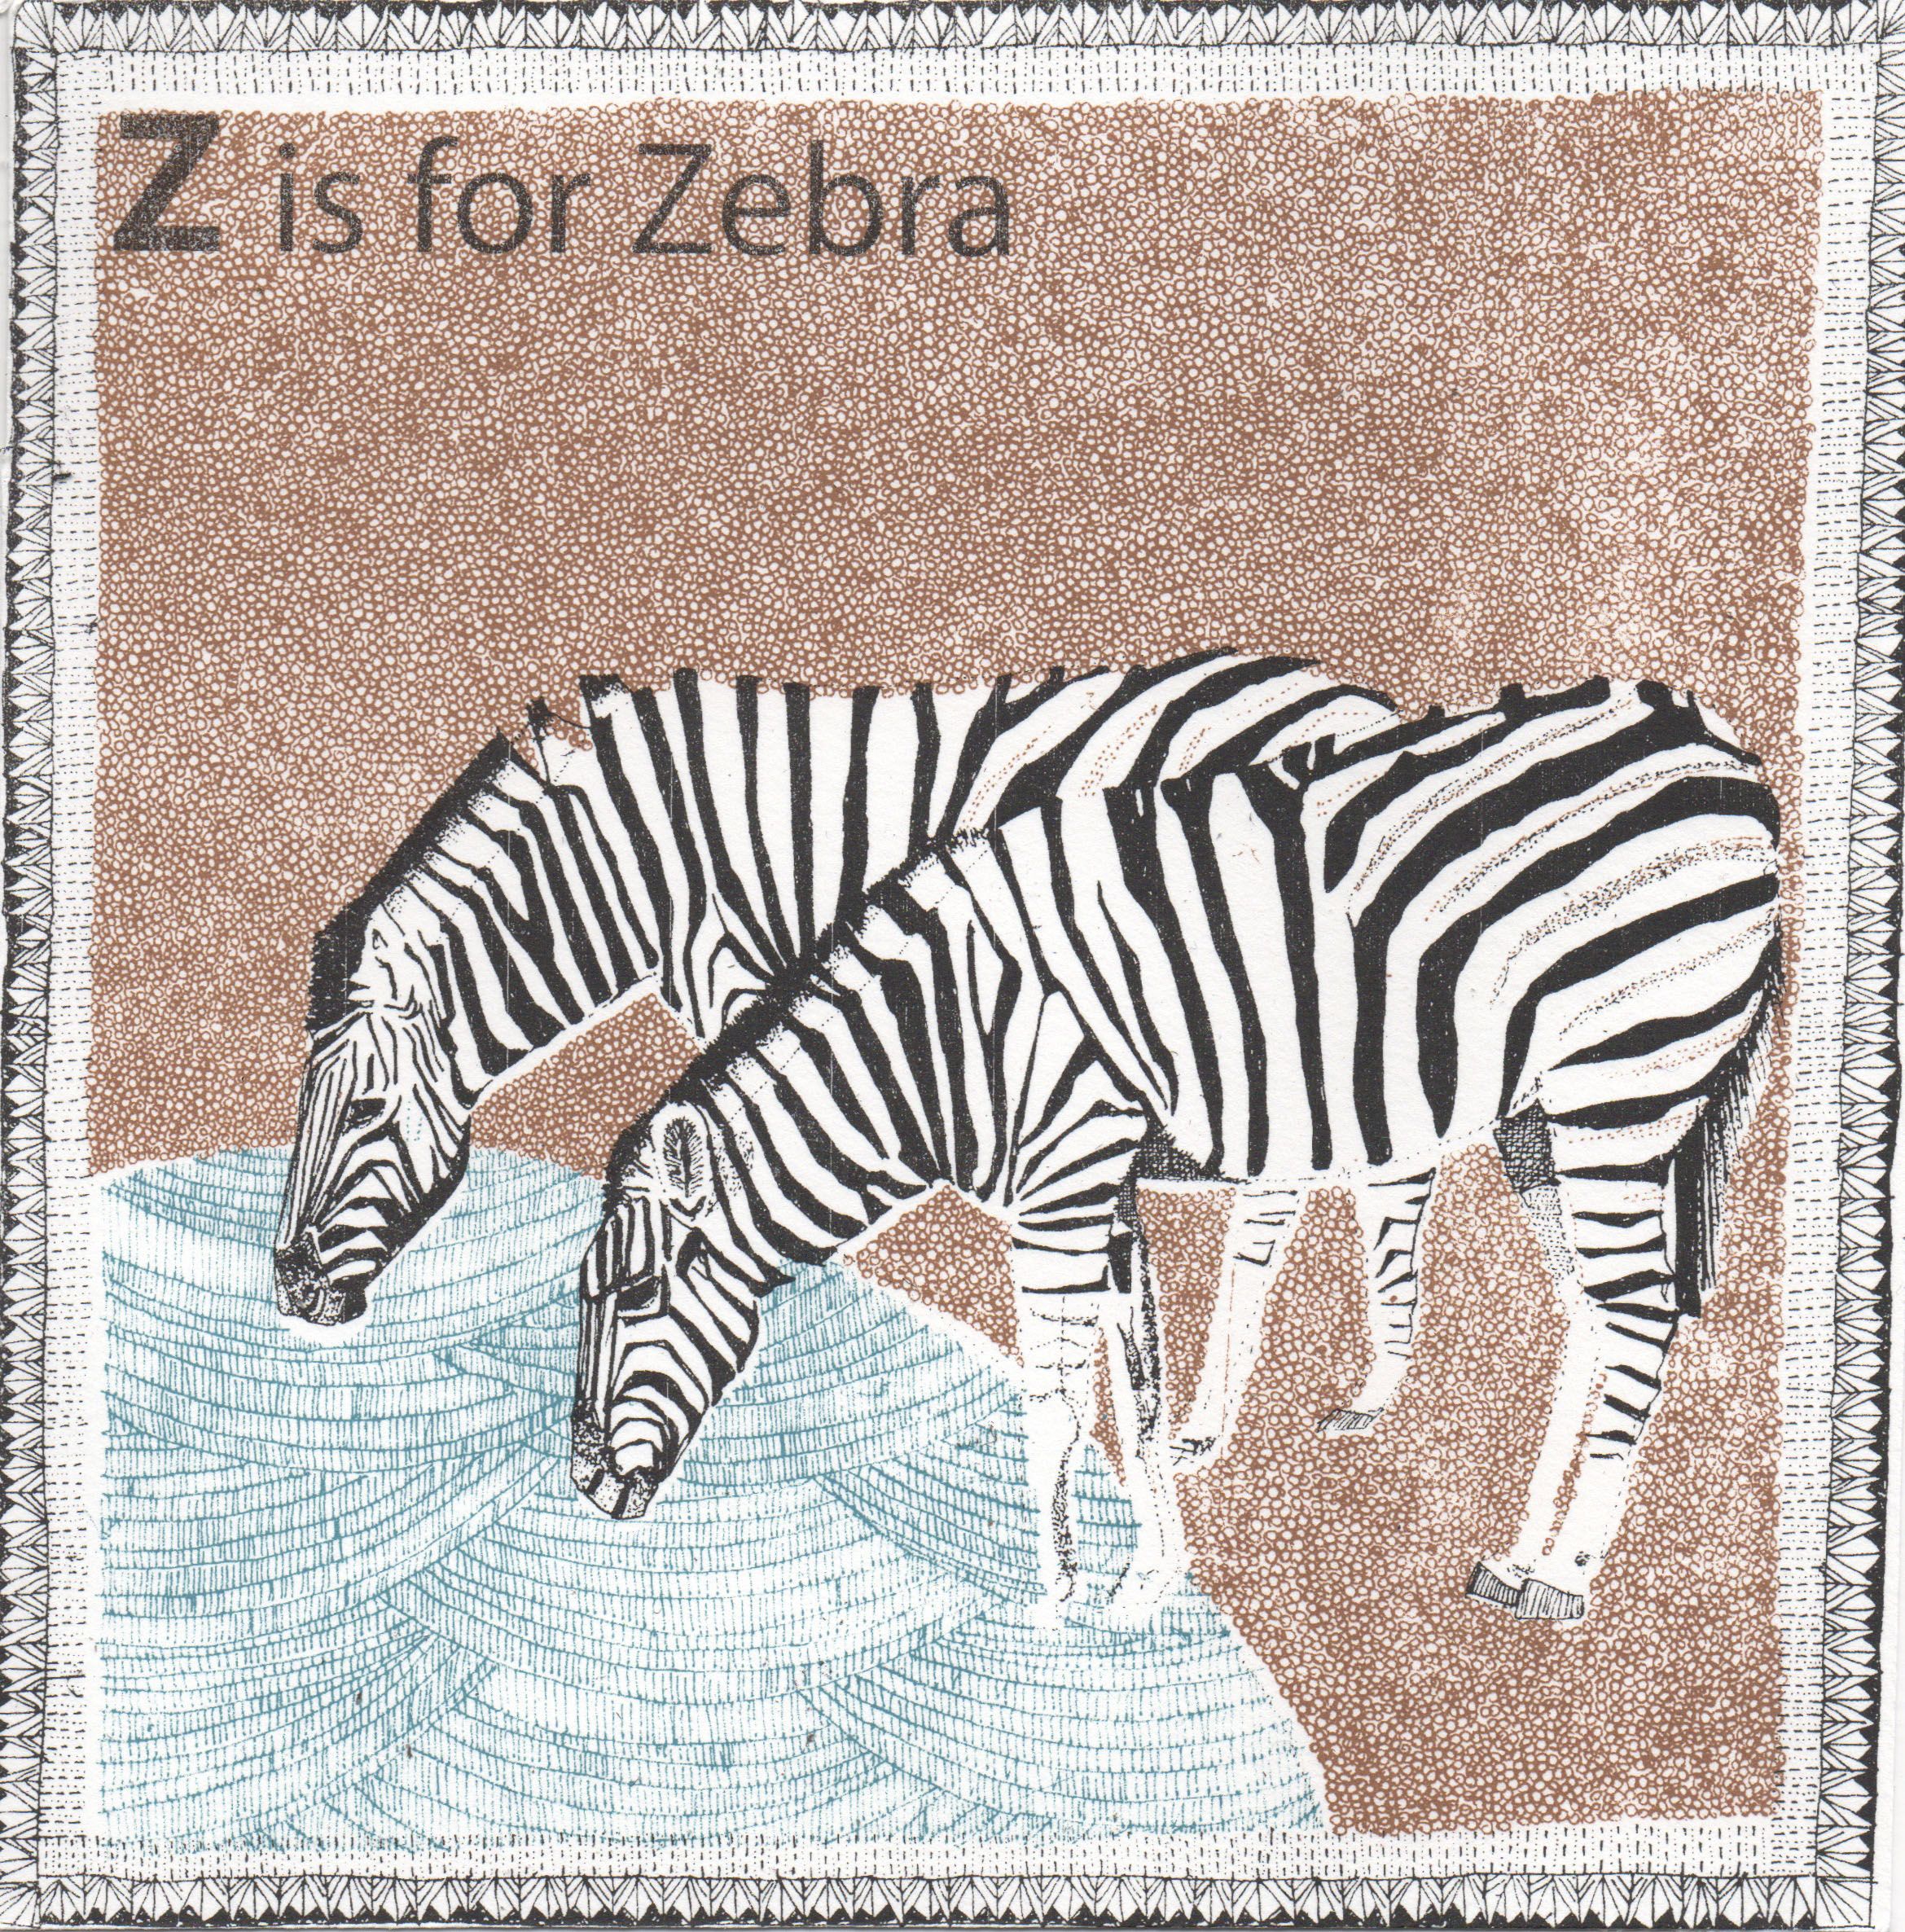 Z is for Zebra (small) by Clare Halifax